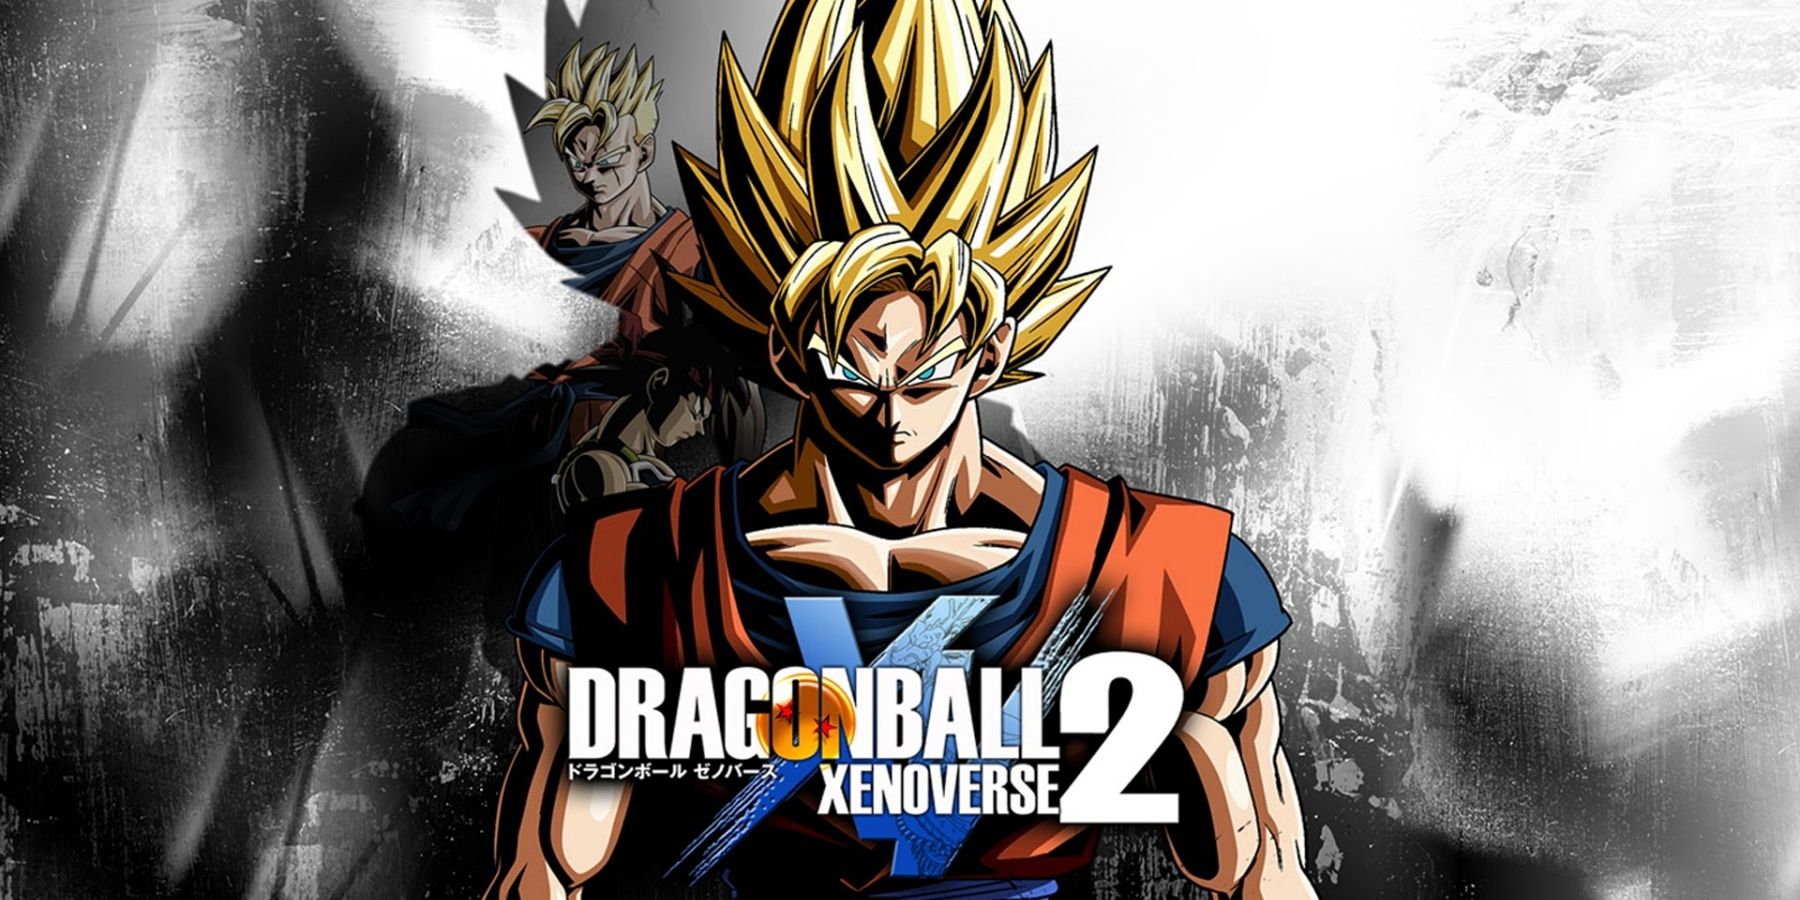 DRAGON BALL XENOVERSE 2  PS4 / XBox One / Switch